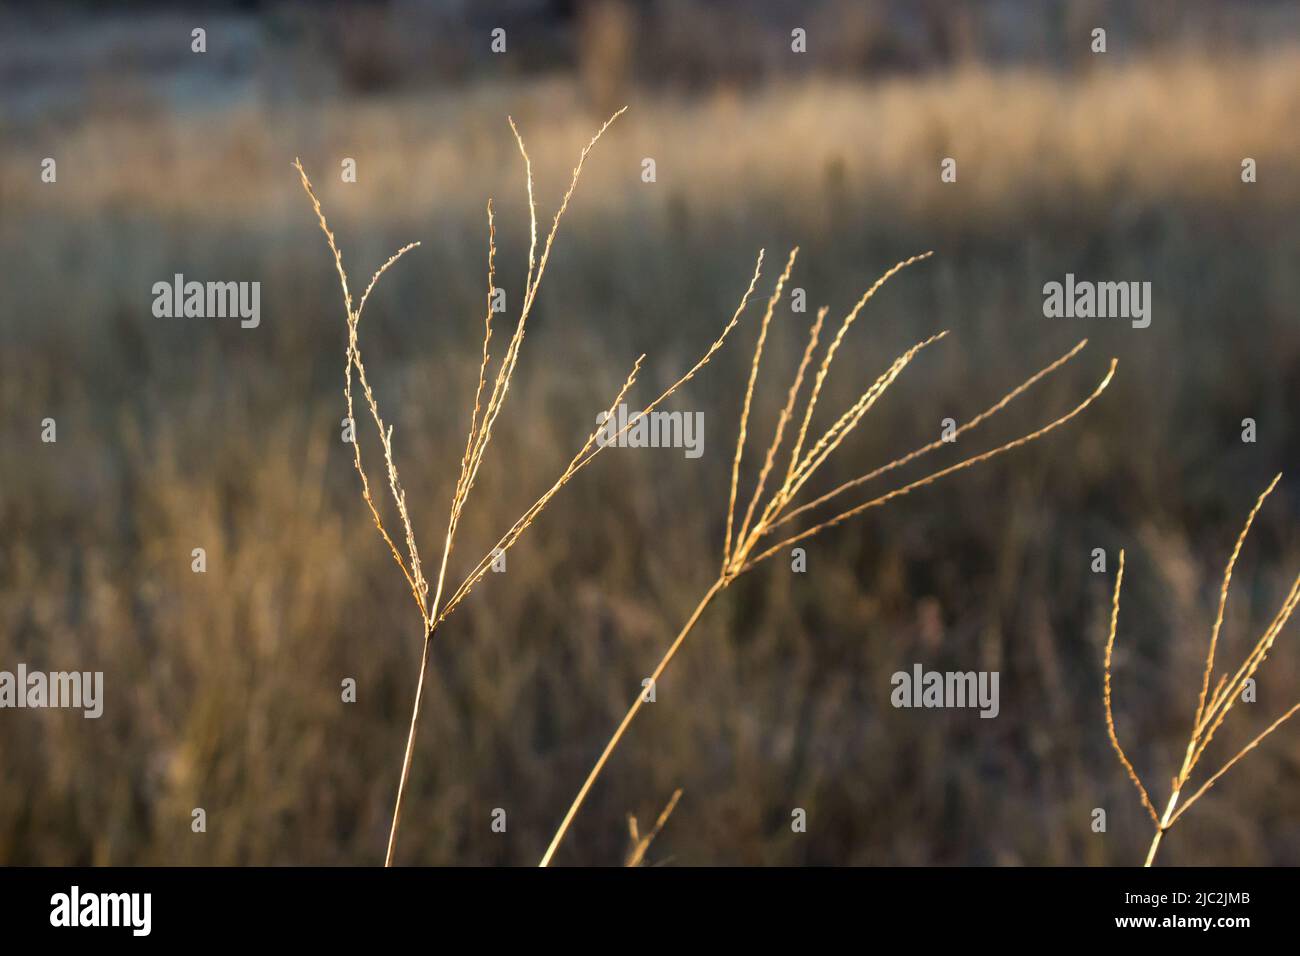 The large finger-like Stalks of Giant Pongola Grass, illuminated in the golden morning light in the rural Free State, South Africa Stock Photo